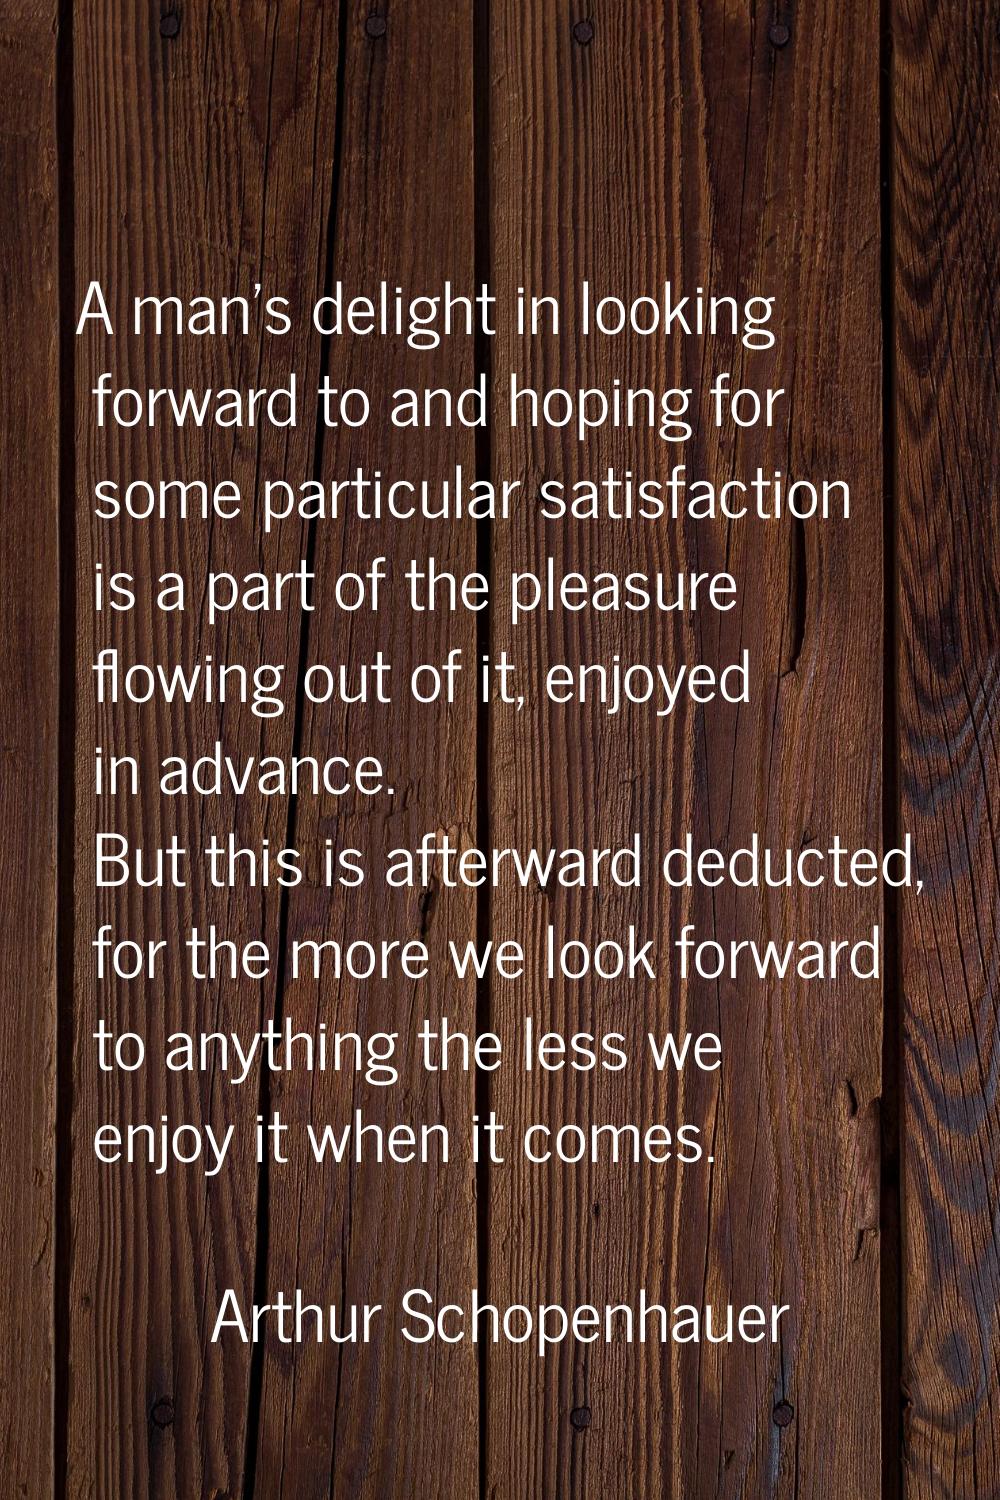 A man's delight in looking forward to and hoping for some particular satisfaction is a part of the 